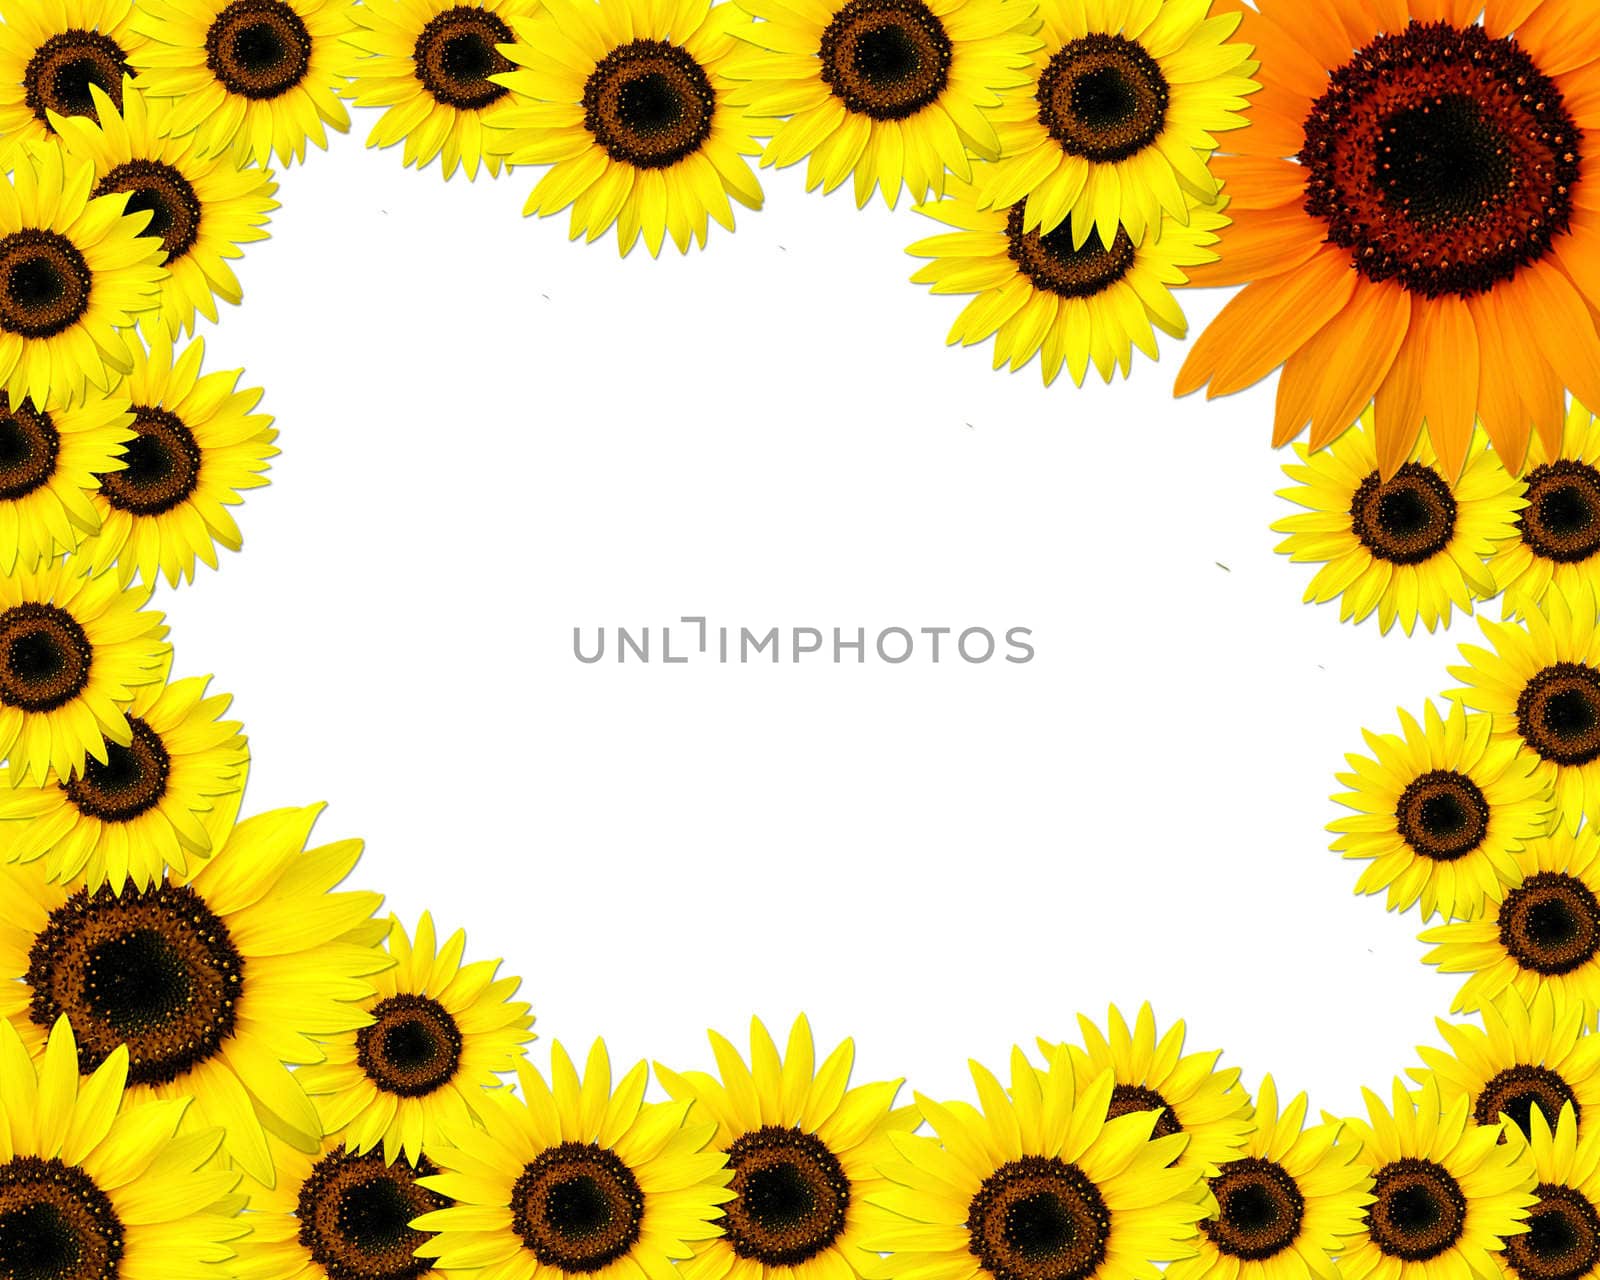 Sunflowers frame with place for you text by rufous